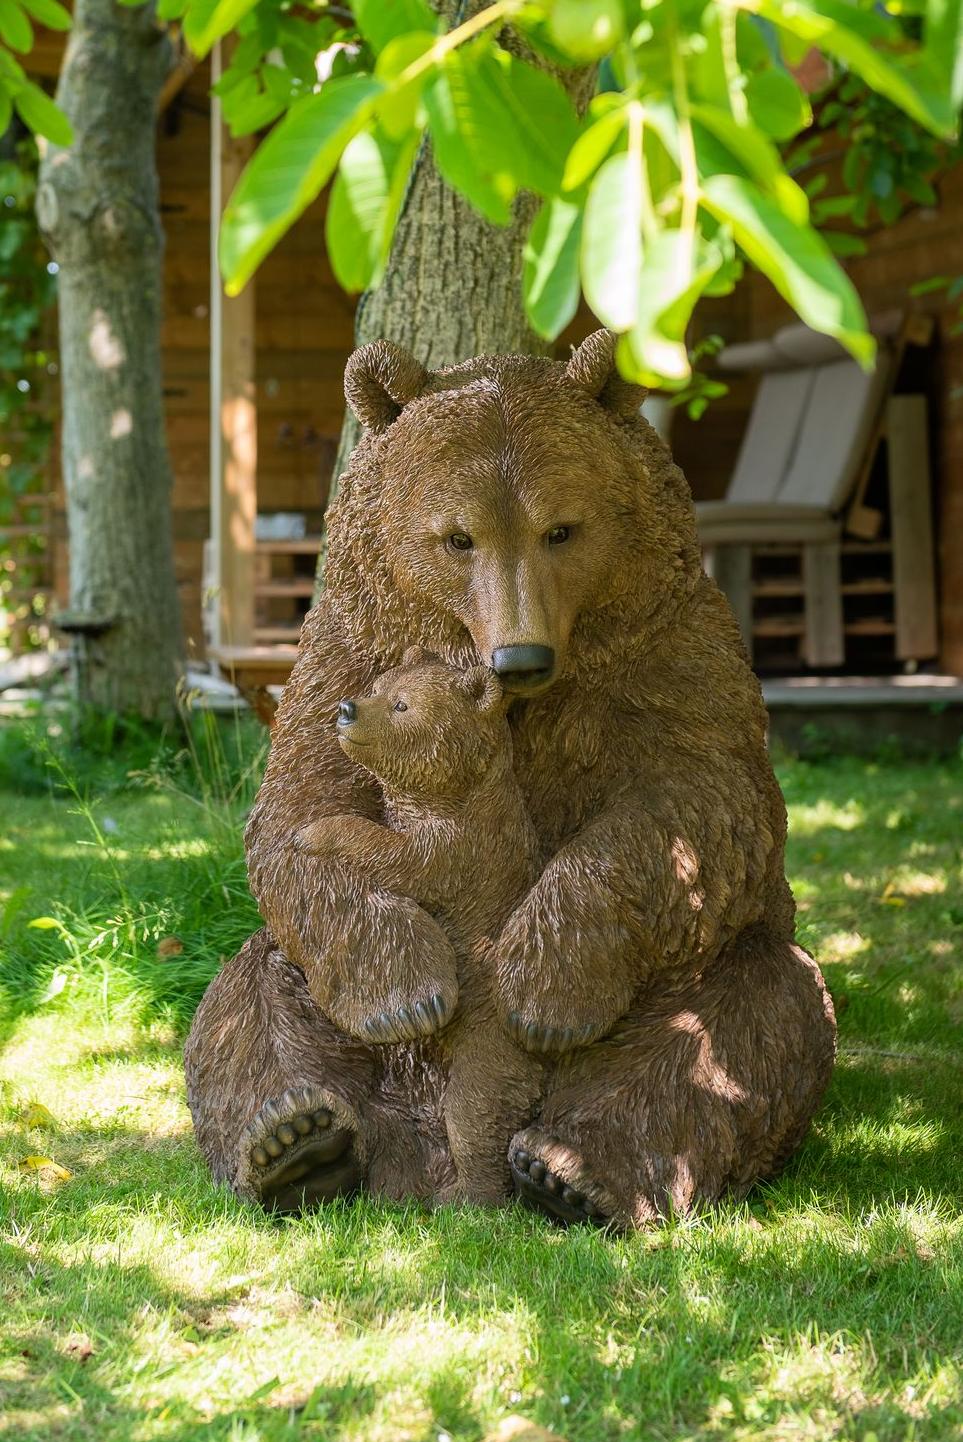 A hyper-realistic statue of a mama bear with her baby under a tree in a garden Garden ID